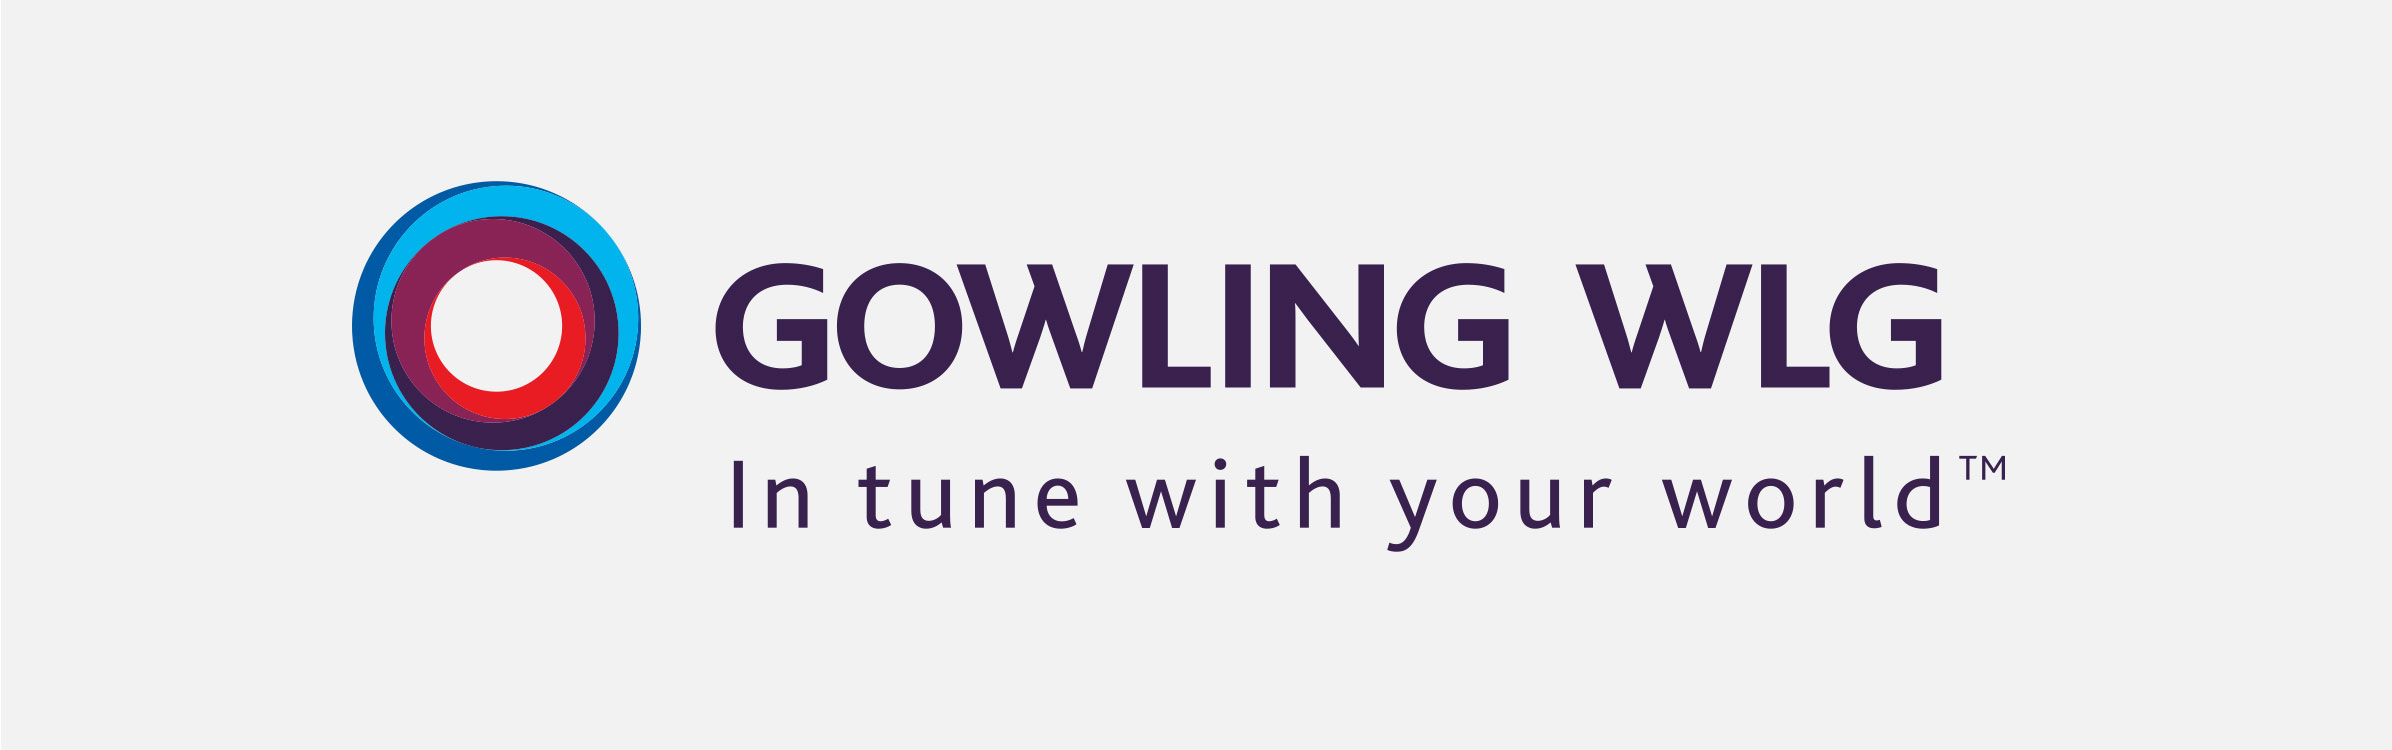 New Gowling logo with tagline “In tune with your world” is shown.